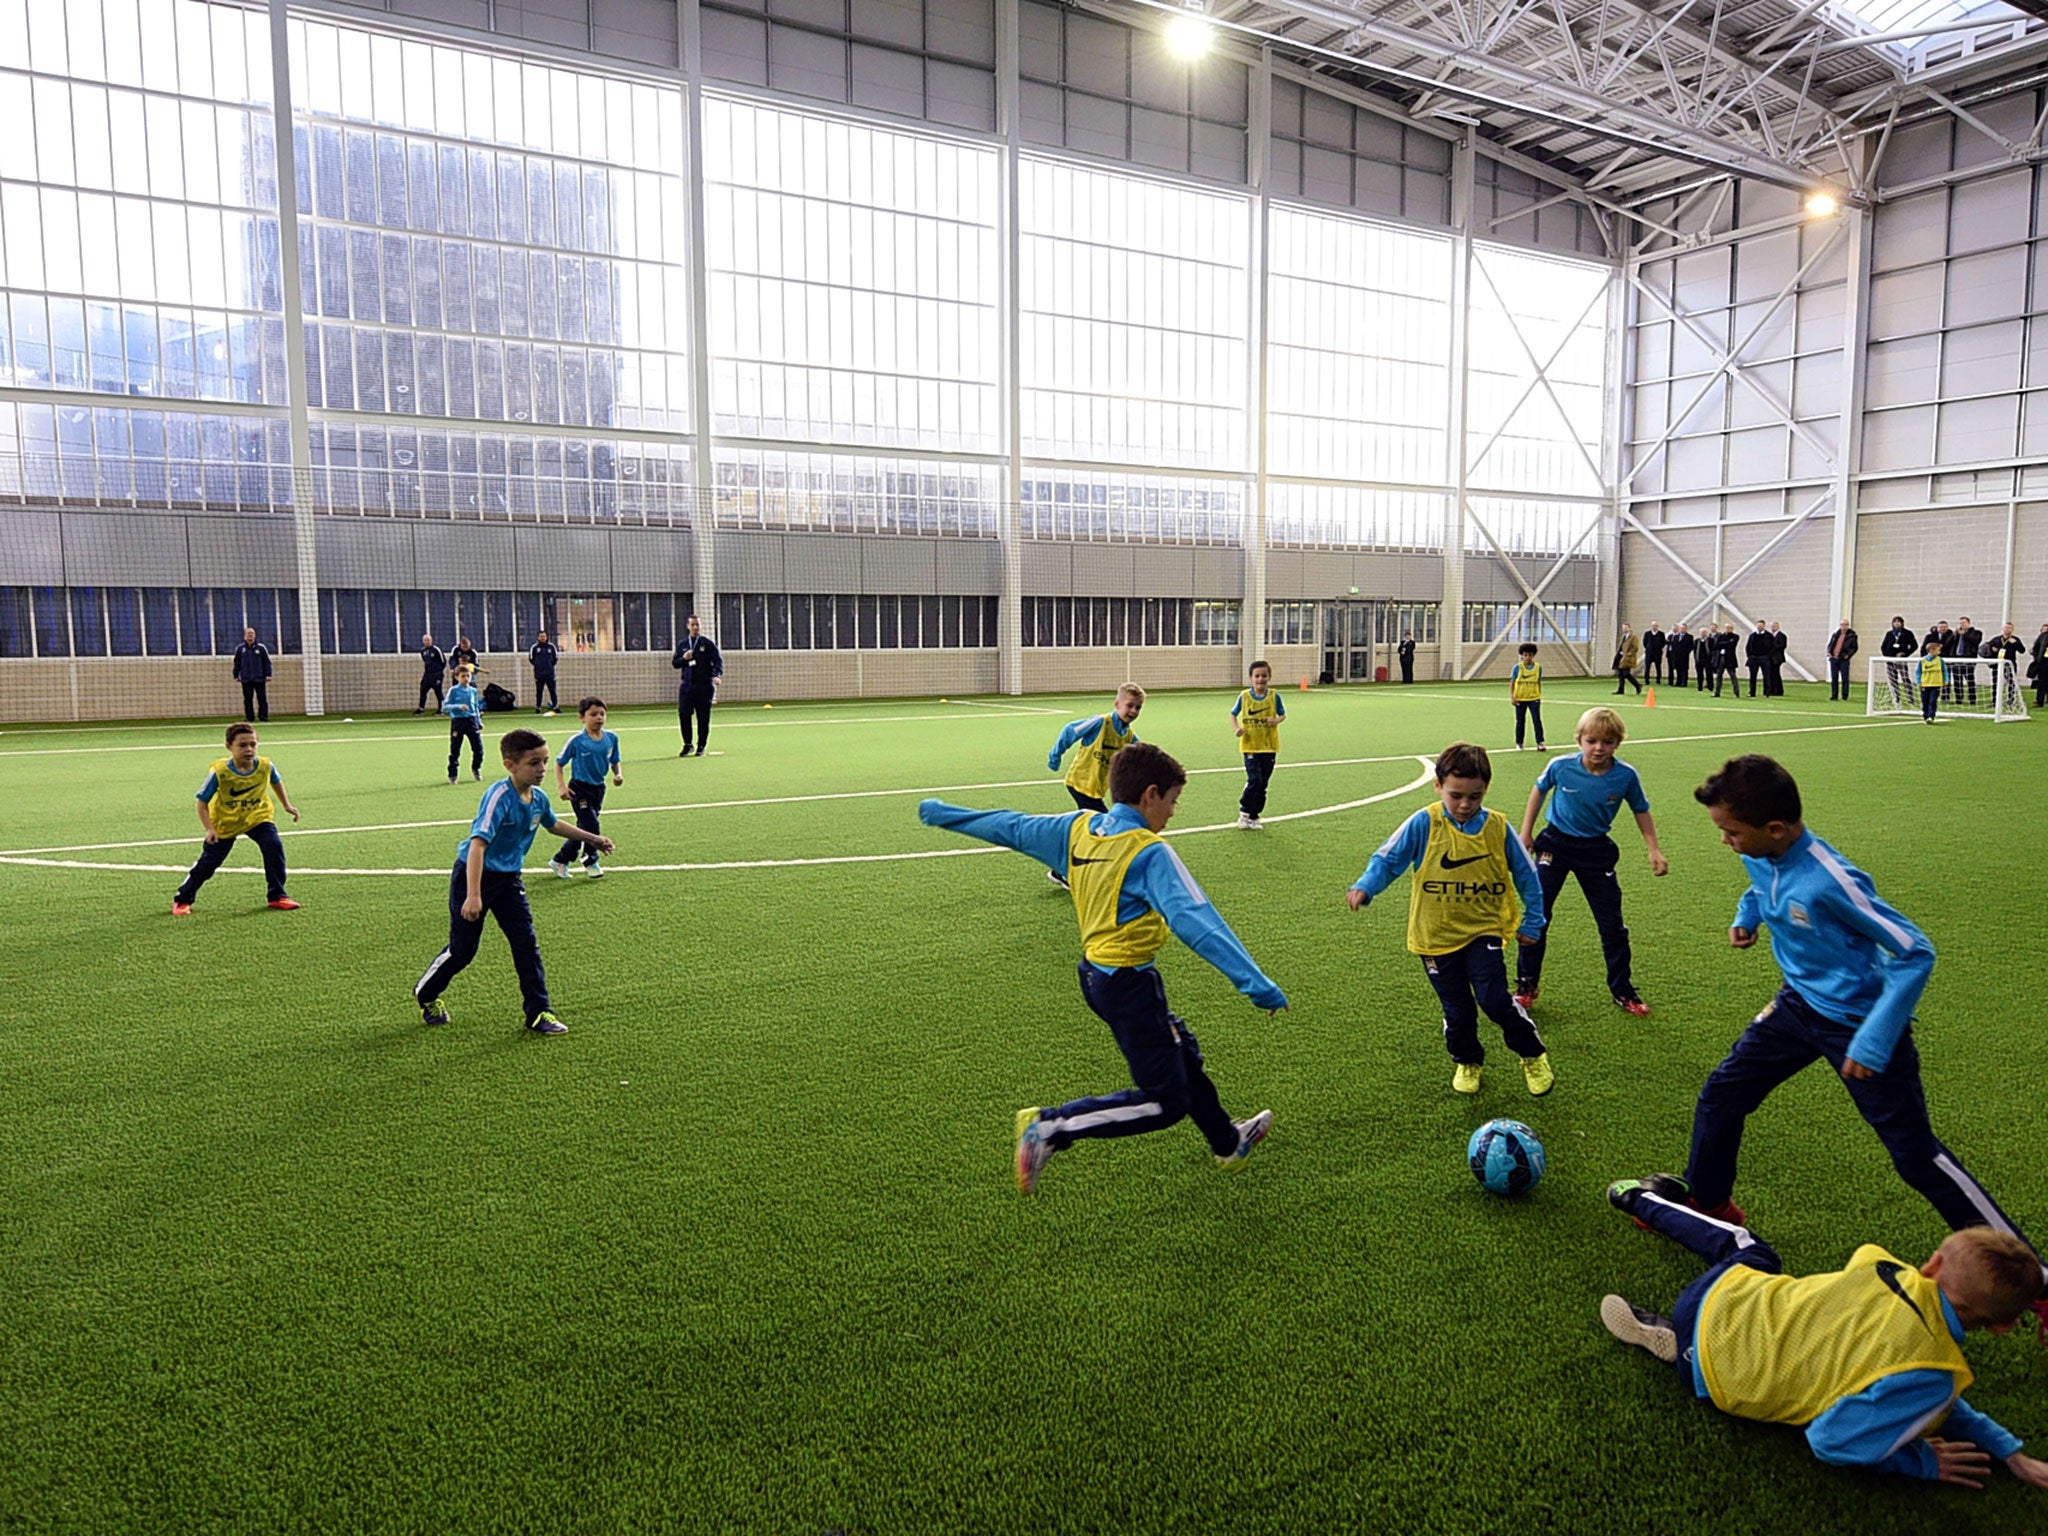 Young players enjoying the facilities at Manchester City’s new £200m academy which opened this week